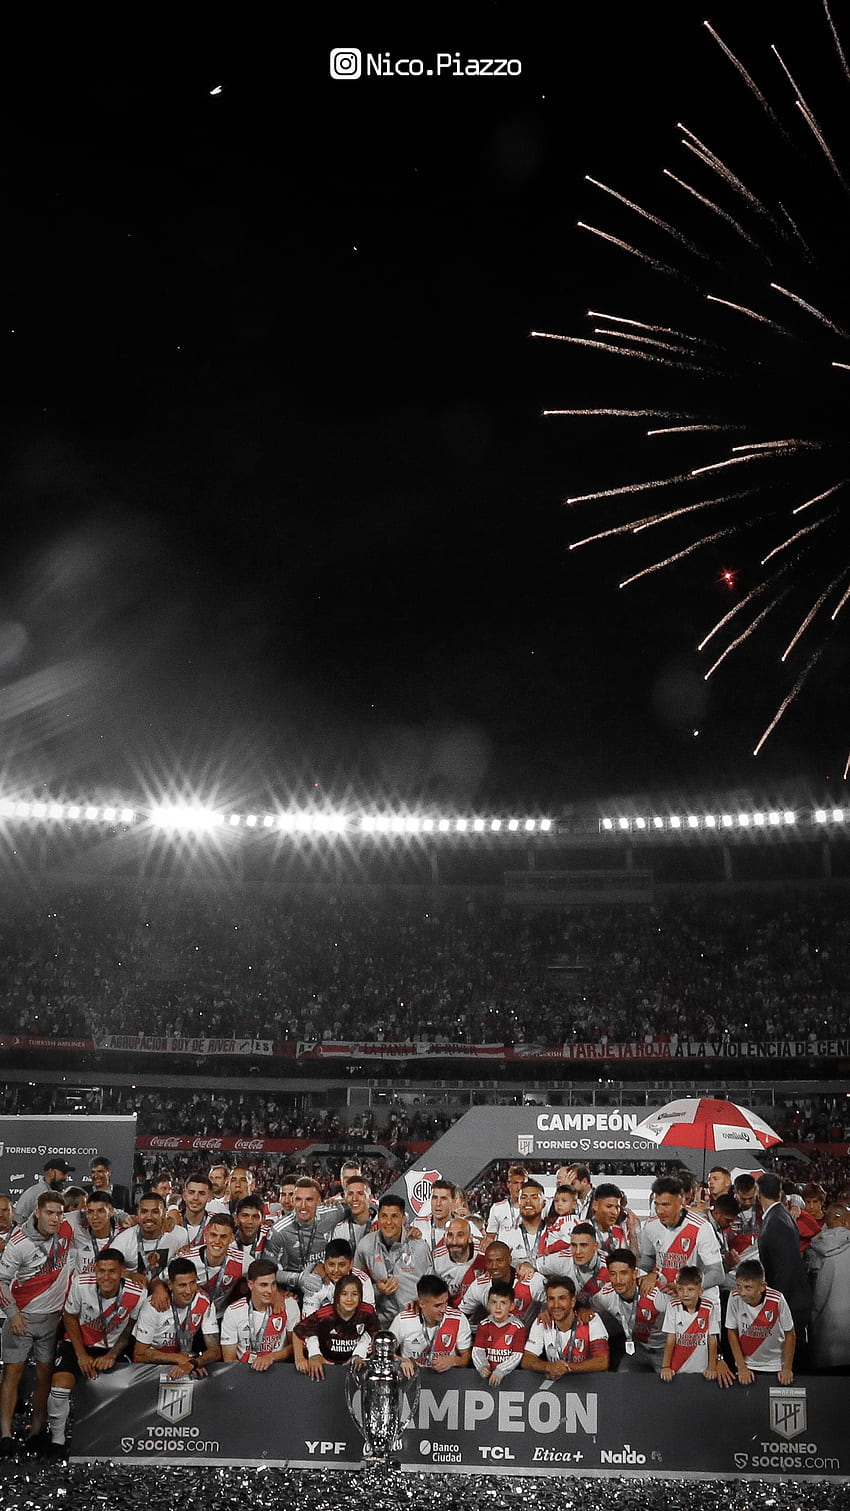 RIVER CAMPEON, riverplate, nicopiazzo, argentina, river plate, cr7, football, monumental, messi, football HD phone wallpaper